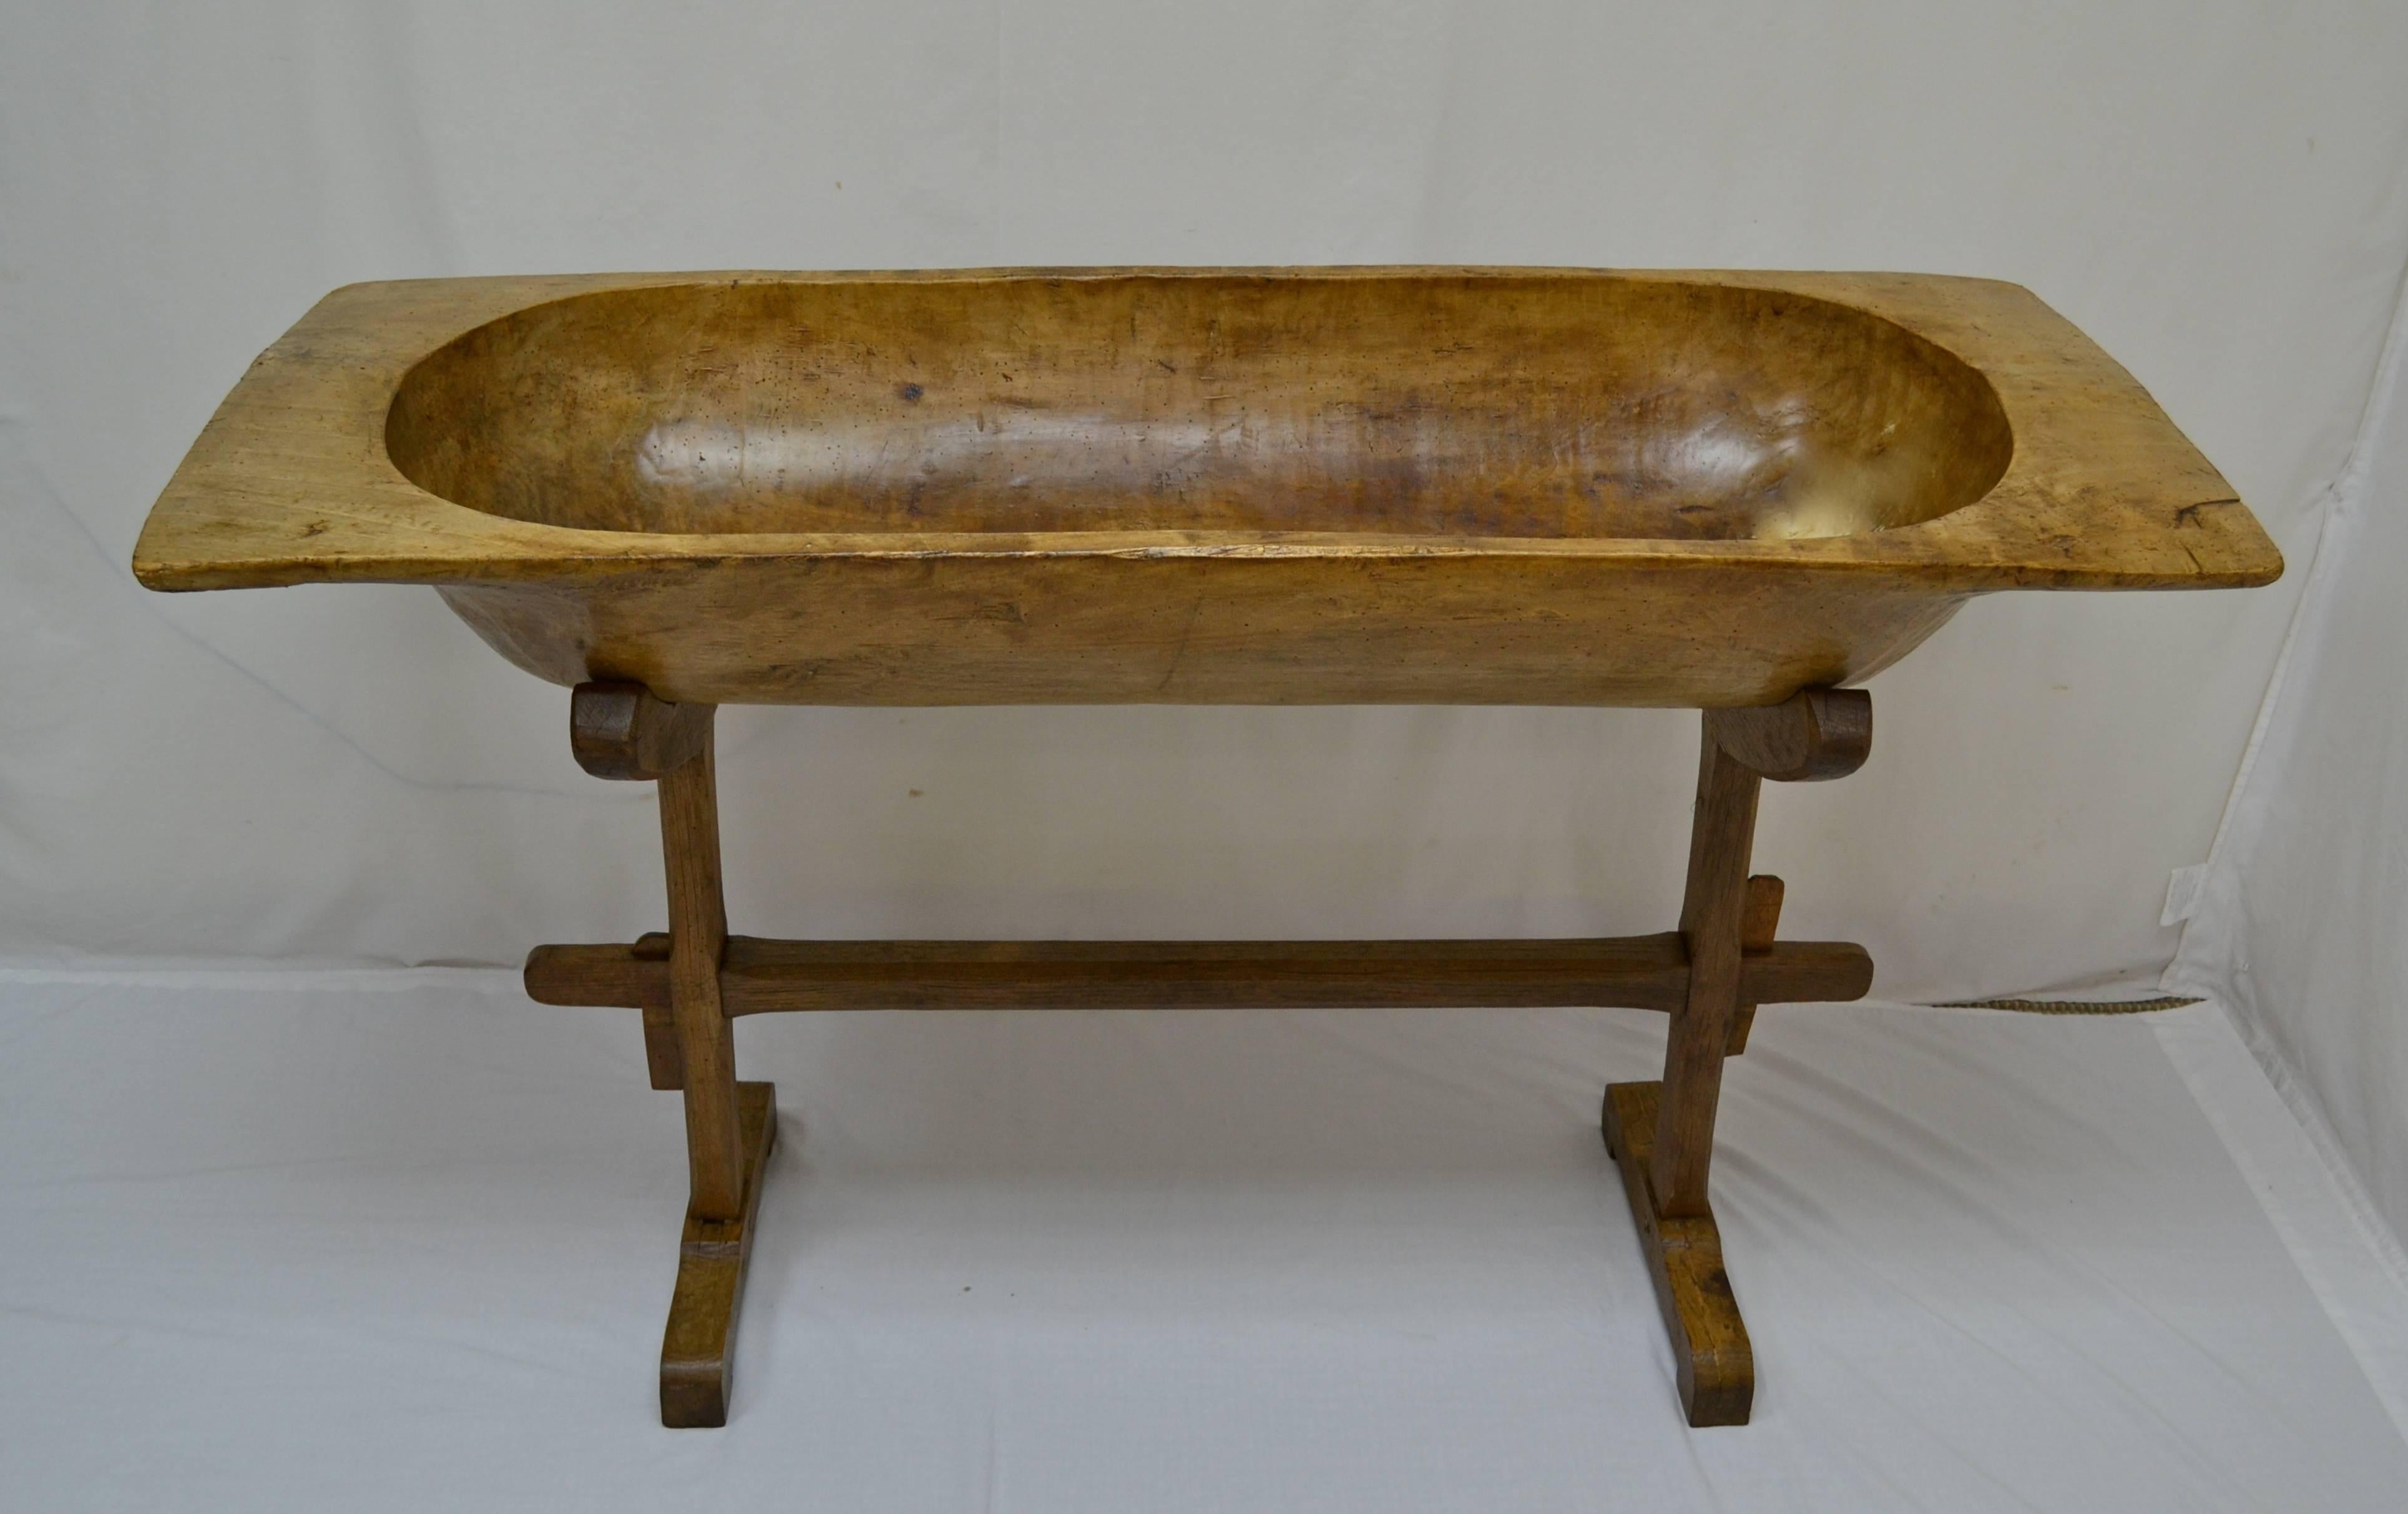 Used for multi-family baking, this huge fruitwood trog was hand-crafted from a single split log, its rich rugger brown colour showing off the tool marks on its hand-hewn interior.  It has one or two superficial cracks, some inactive woodworm holes